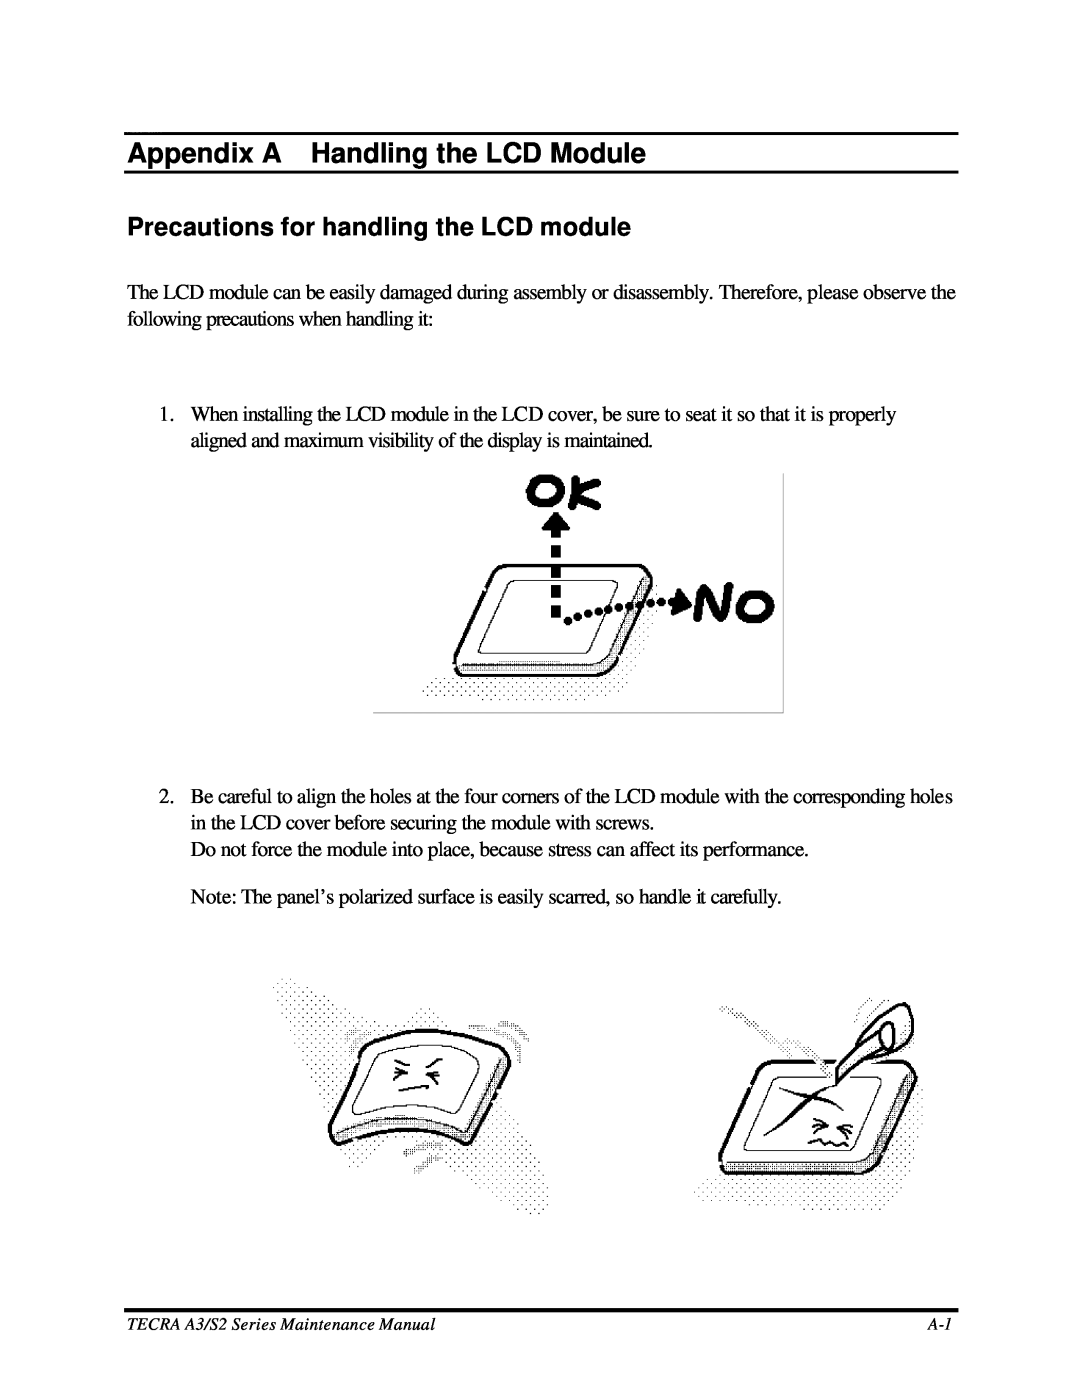 Toshiba S2 manual Appendix A Handling the LCD Module, Precautions for handling the LCD module 